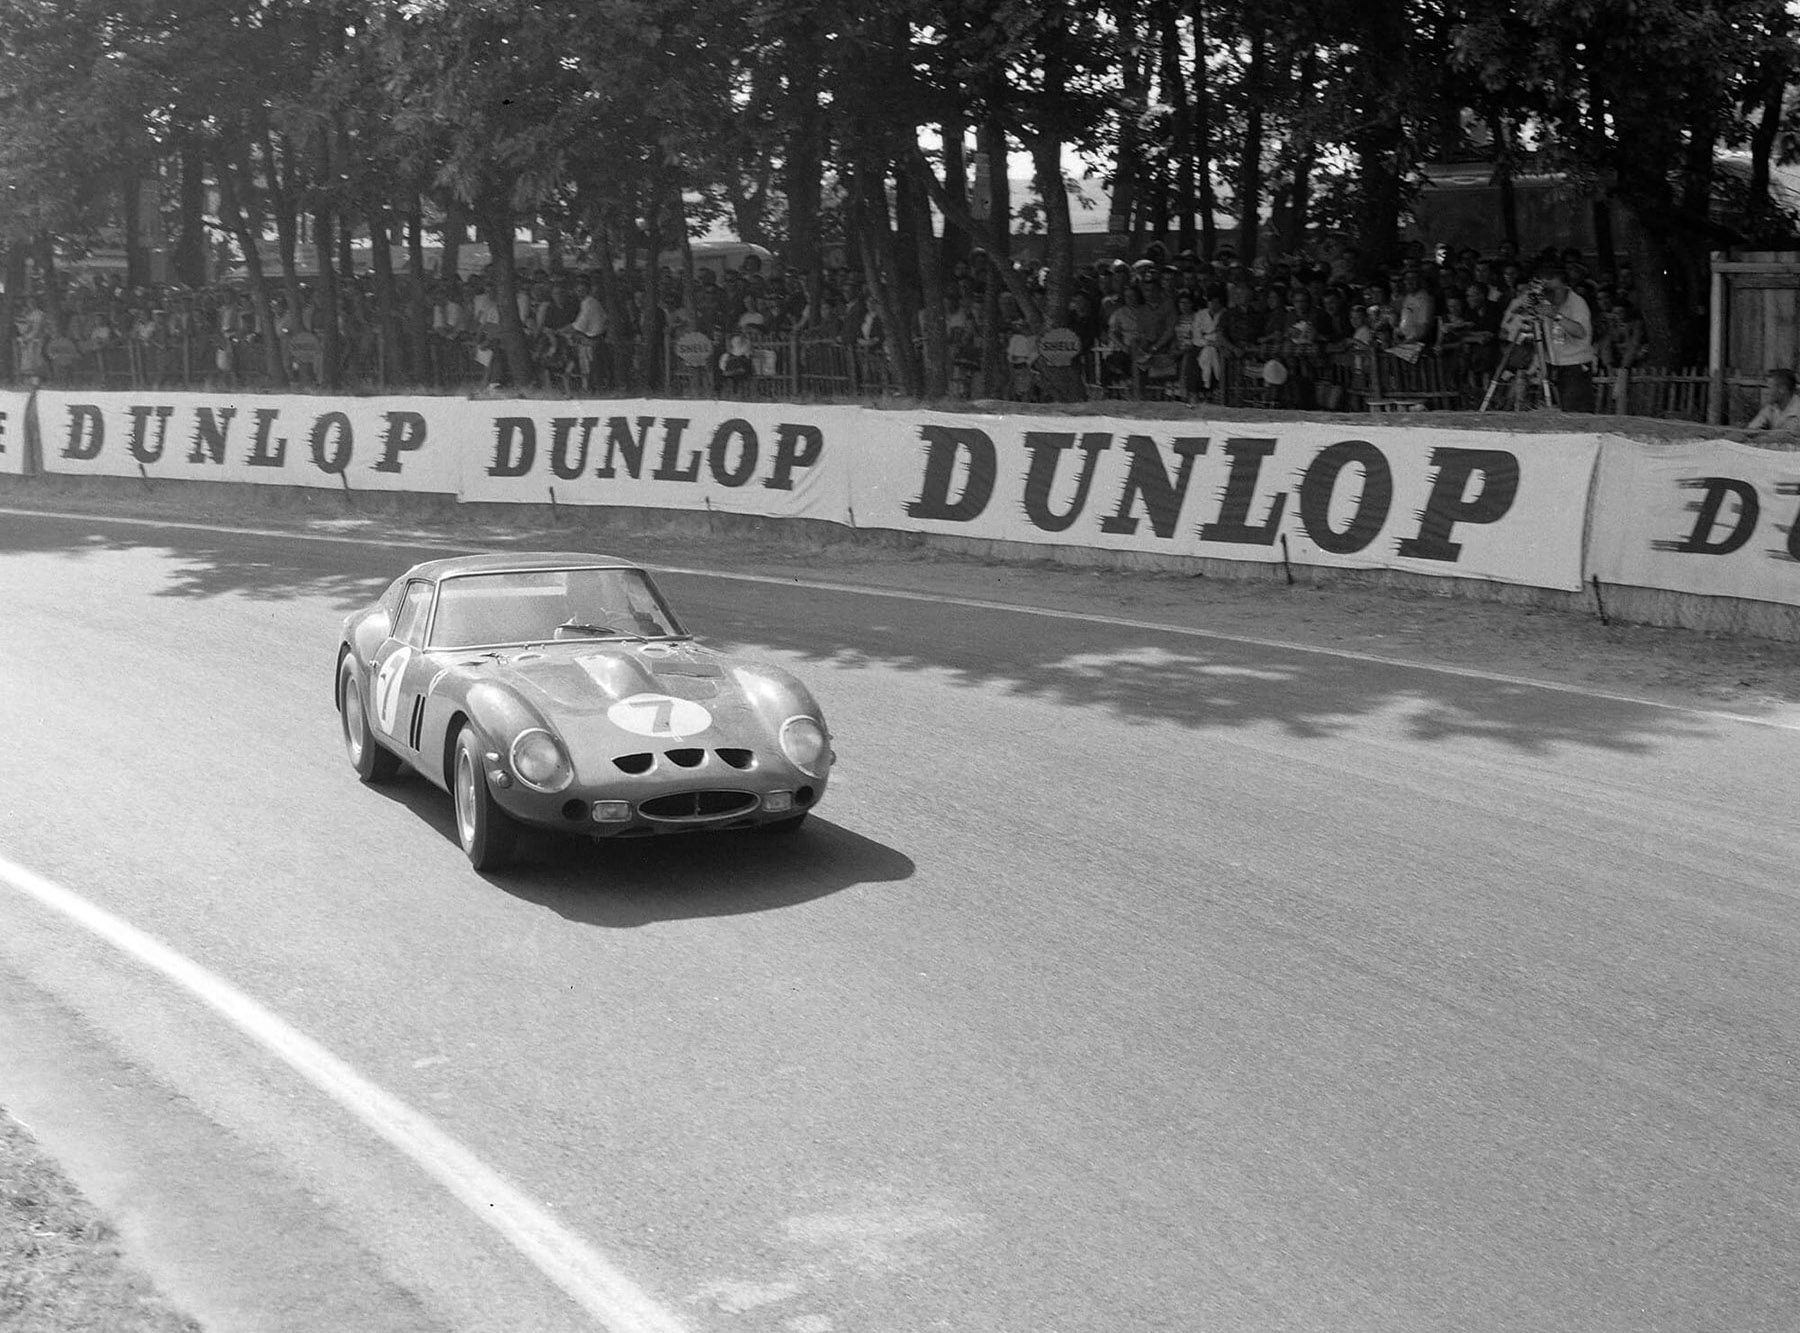 Chassis no. 3765, race #7, driven by Mike Parkes and Lorenzo Bandini during the 24 Hours of Le Mans at Circuit de la Sarthe, June 1962.